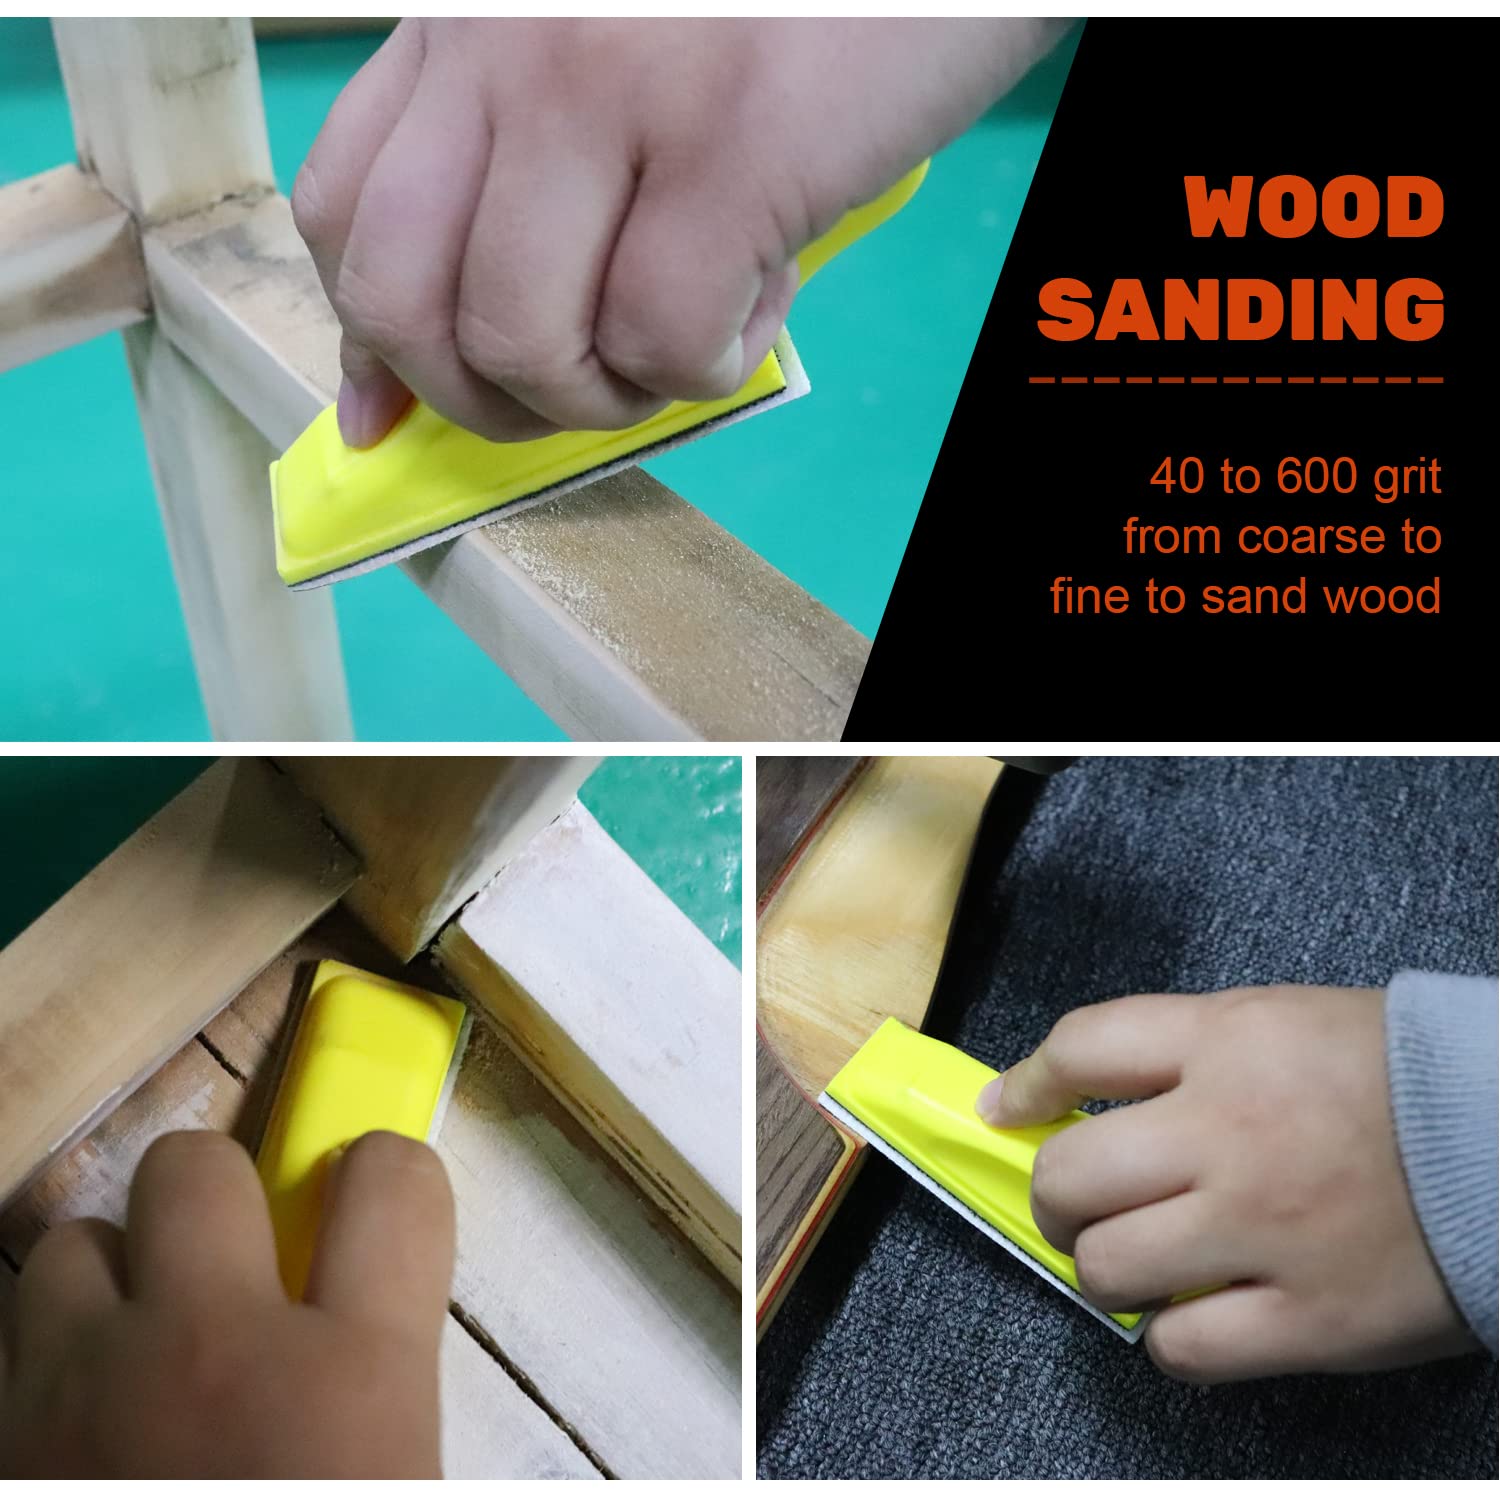 POLIWELL Micro Sanding Tools 3.5” x 1” Detail Sander for Small Projects, Mini Handle Sander Kit+ Sandpaper 40 80 120 180 240 400 600 Grit for Crafts Wood Finishing Tight Narrow Spaces, 120 PCS